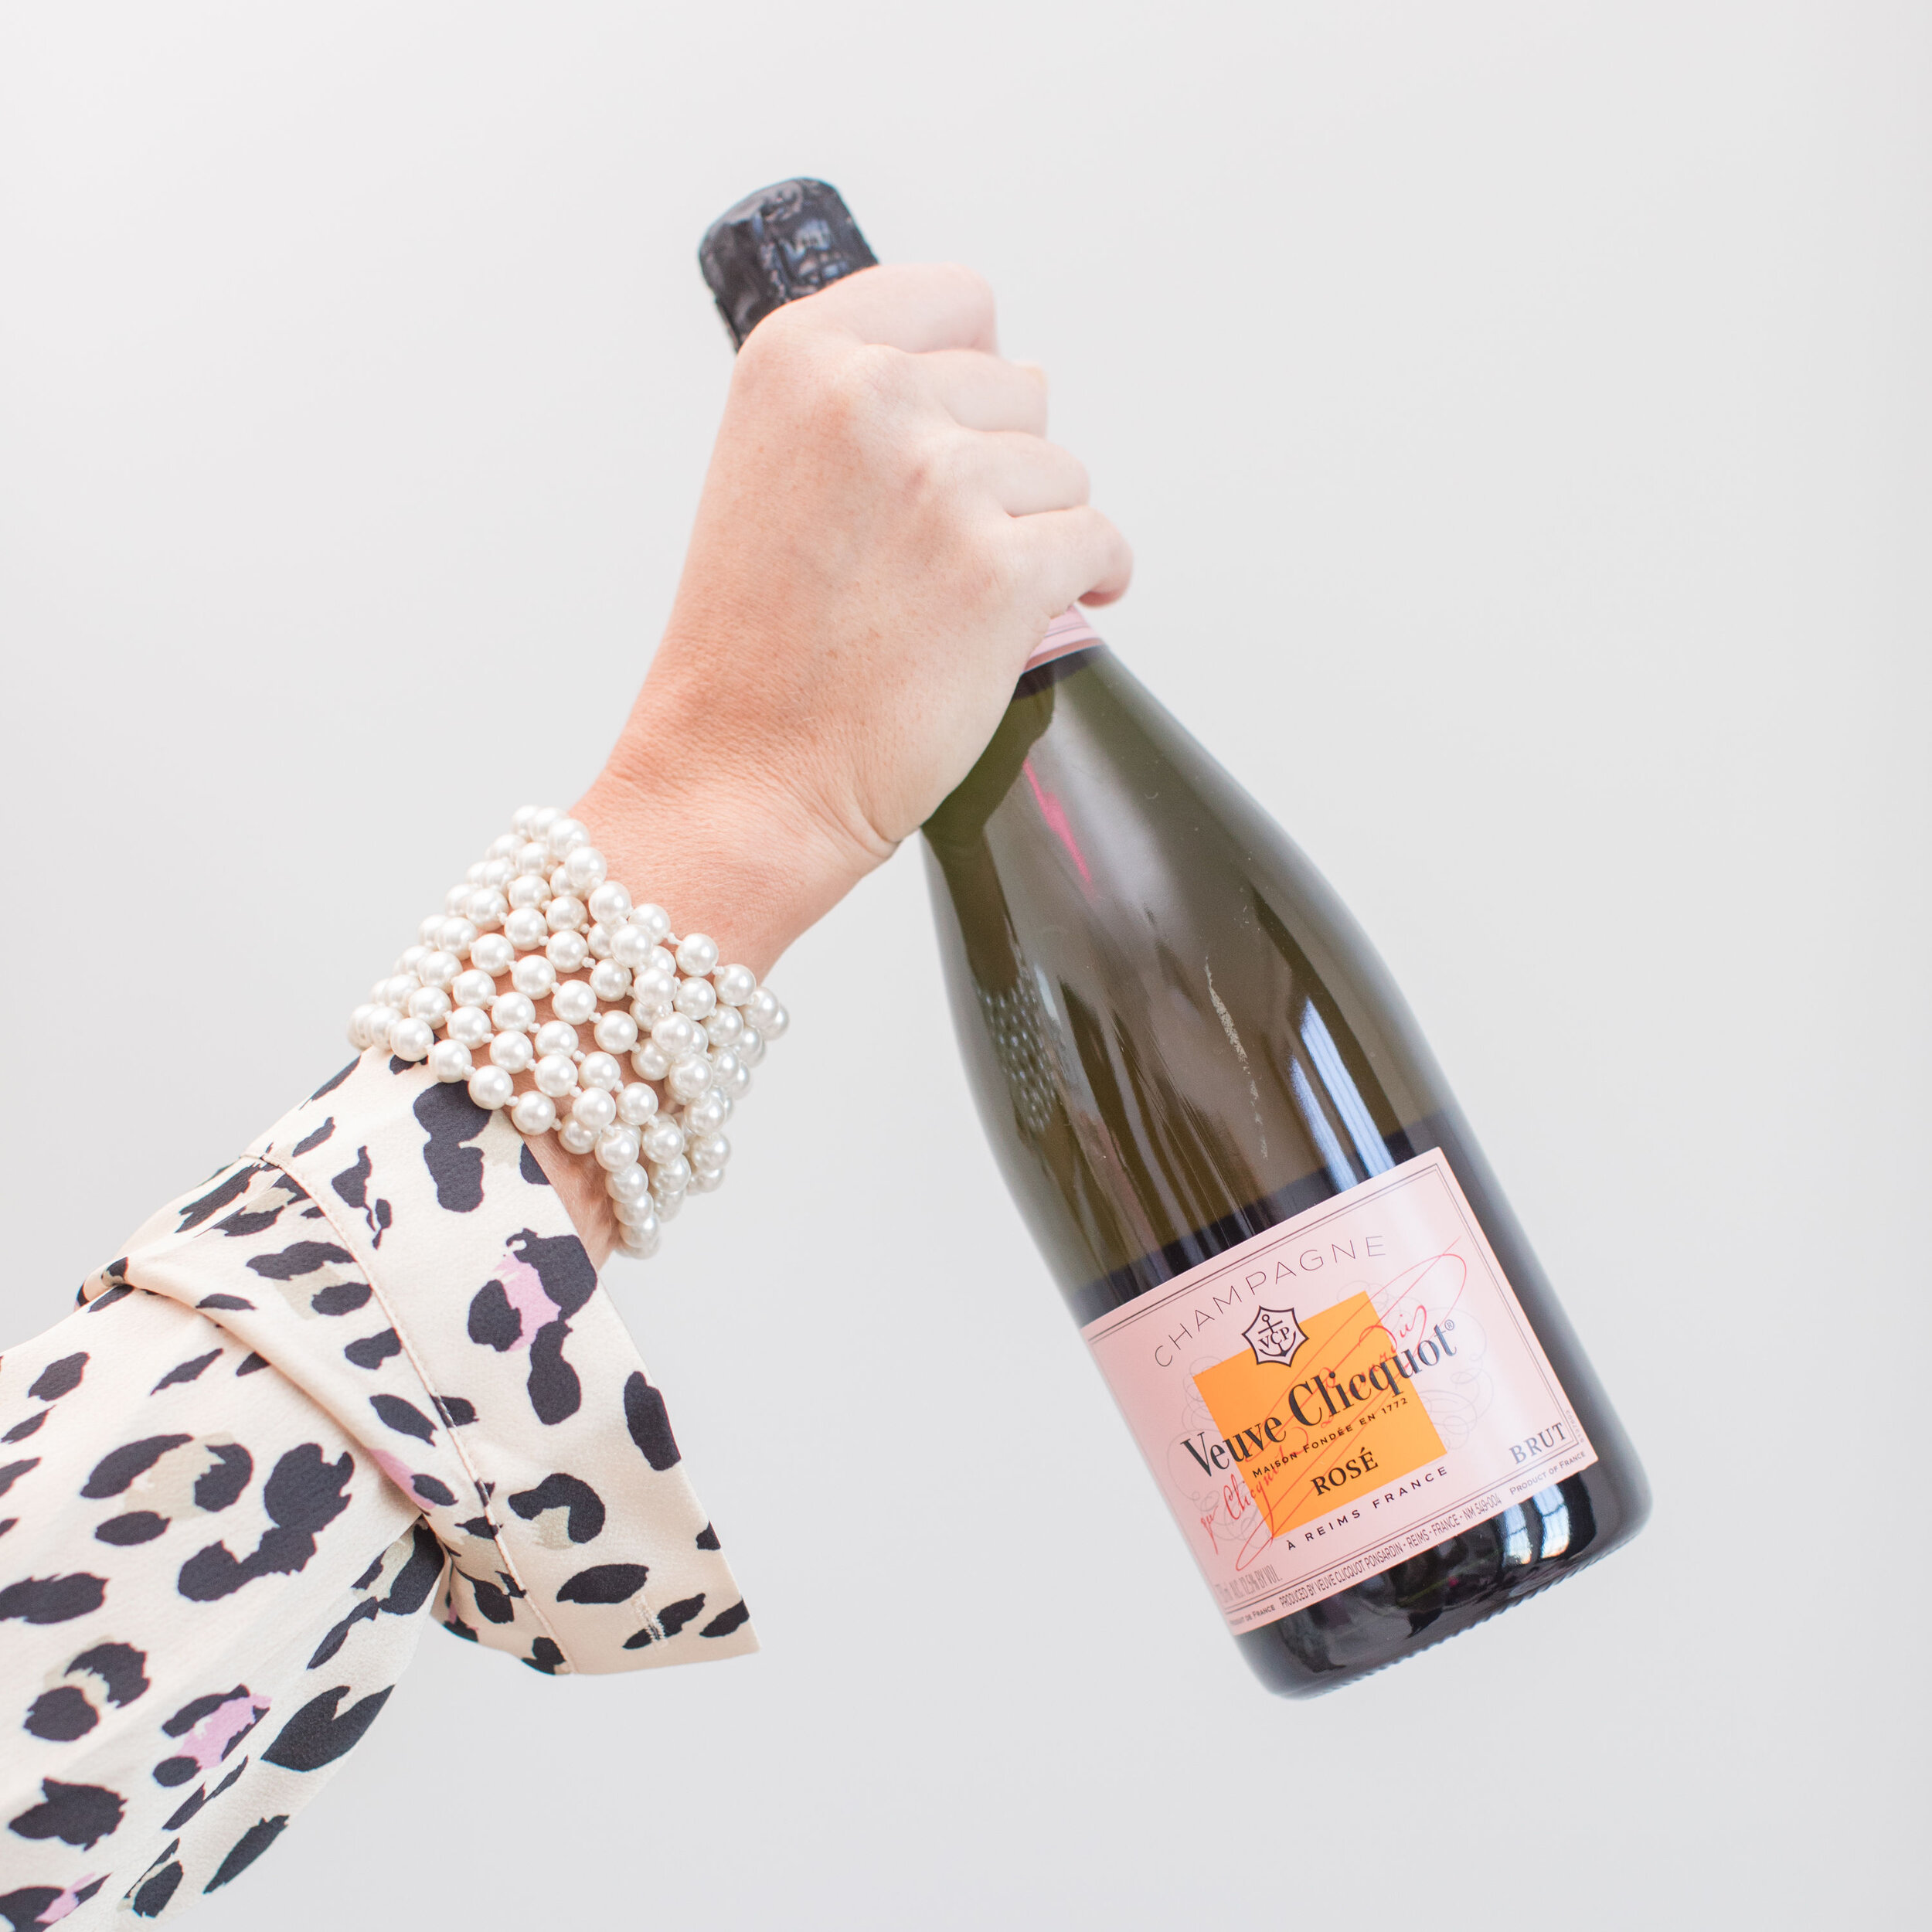 The-Caroline-Doll-Champagne-Is-Always-The-Answer-Lifestyle-Influencer-National-Beverage-Day-Champagne-Life-Veuve-Clicquot-Glass-Of-Sparkling-Bubbly-Sweet-7.jpg